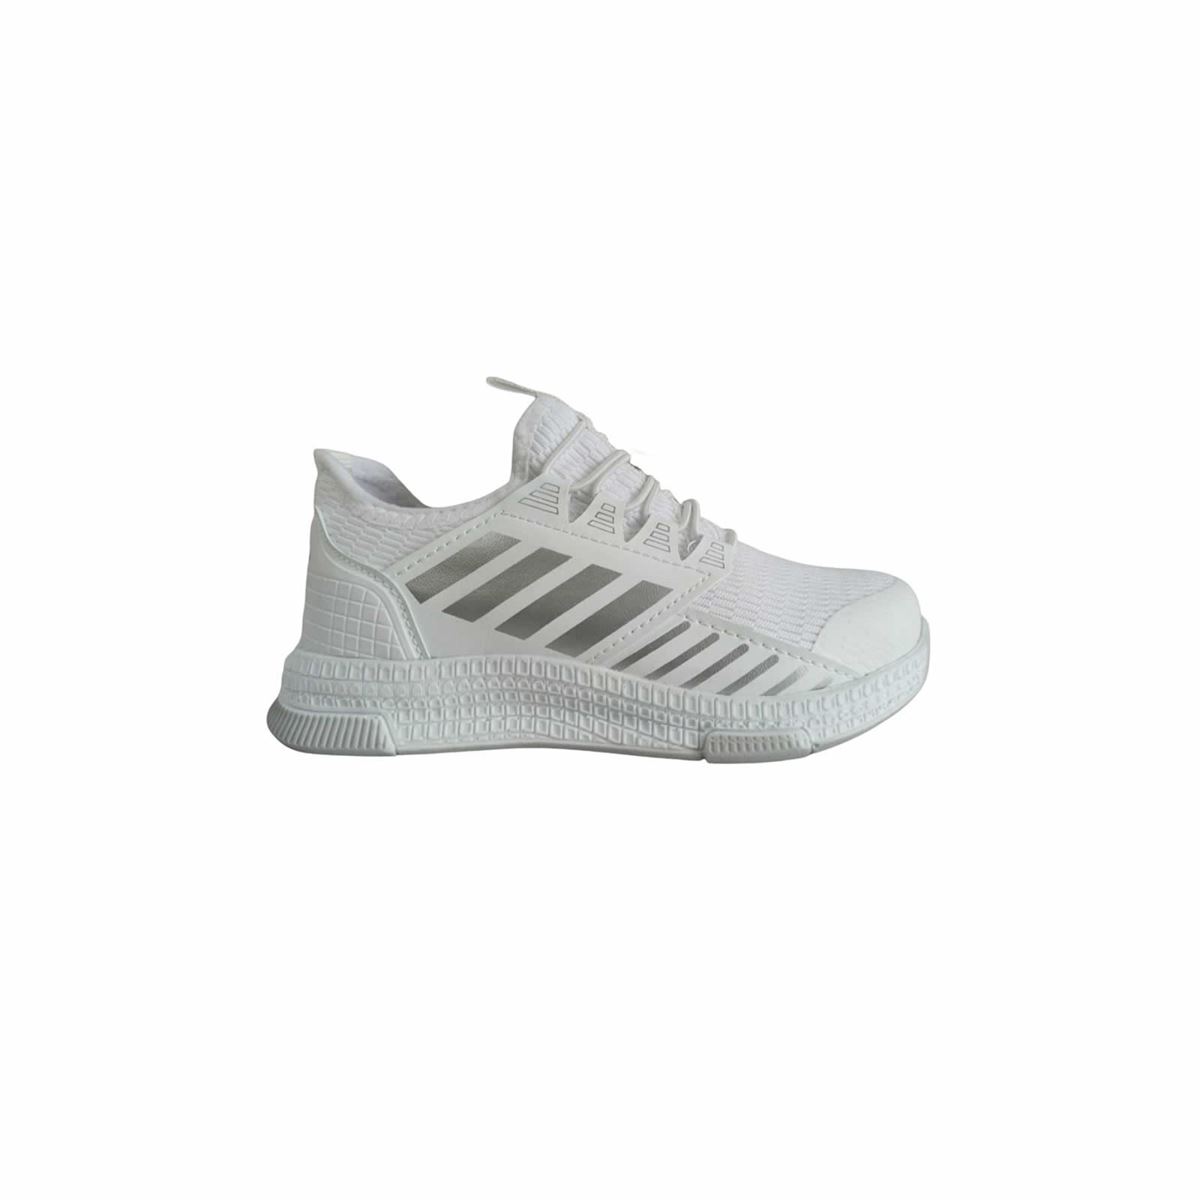 Picture of 1950 Papuçka Sports Knitwear Kids Shoes